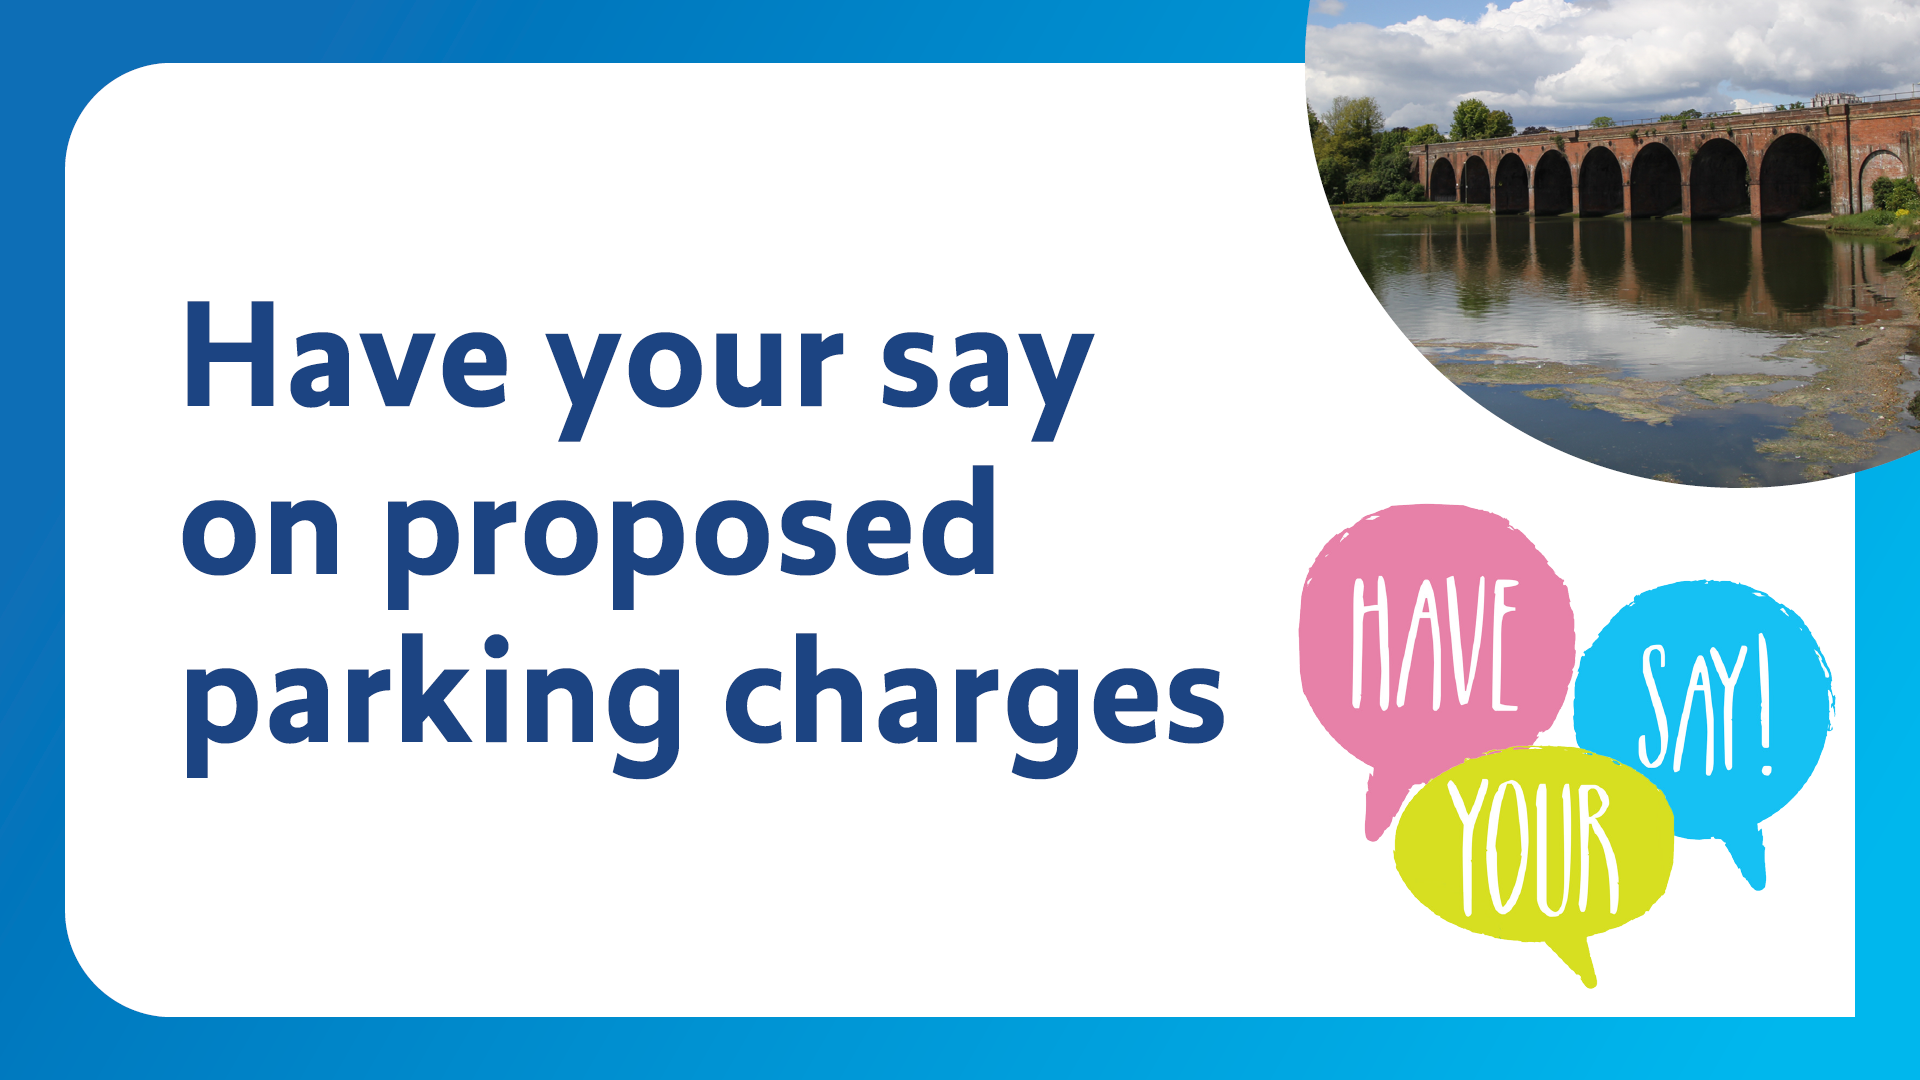 Have your say on proposed parking charges